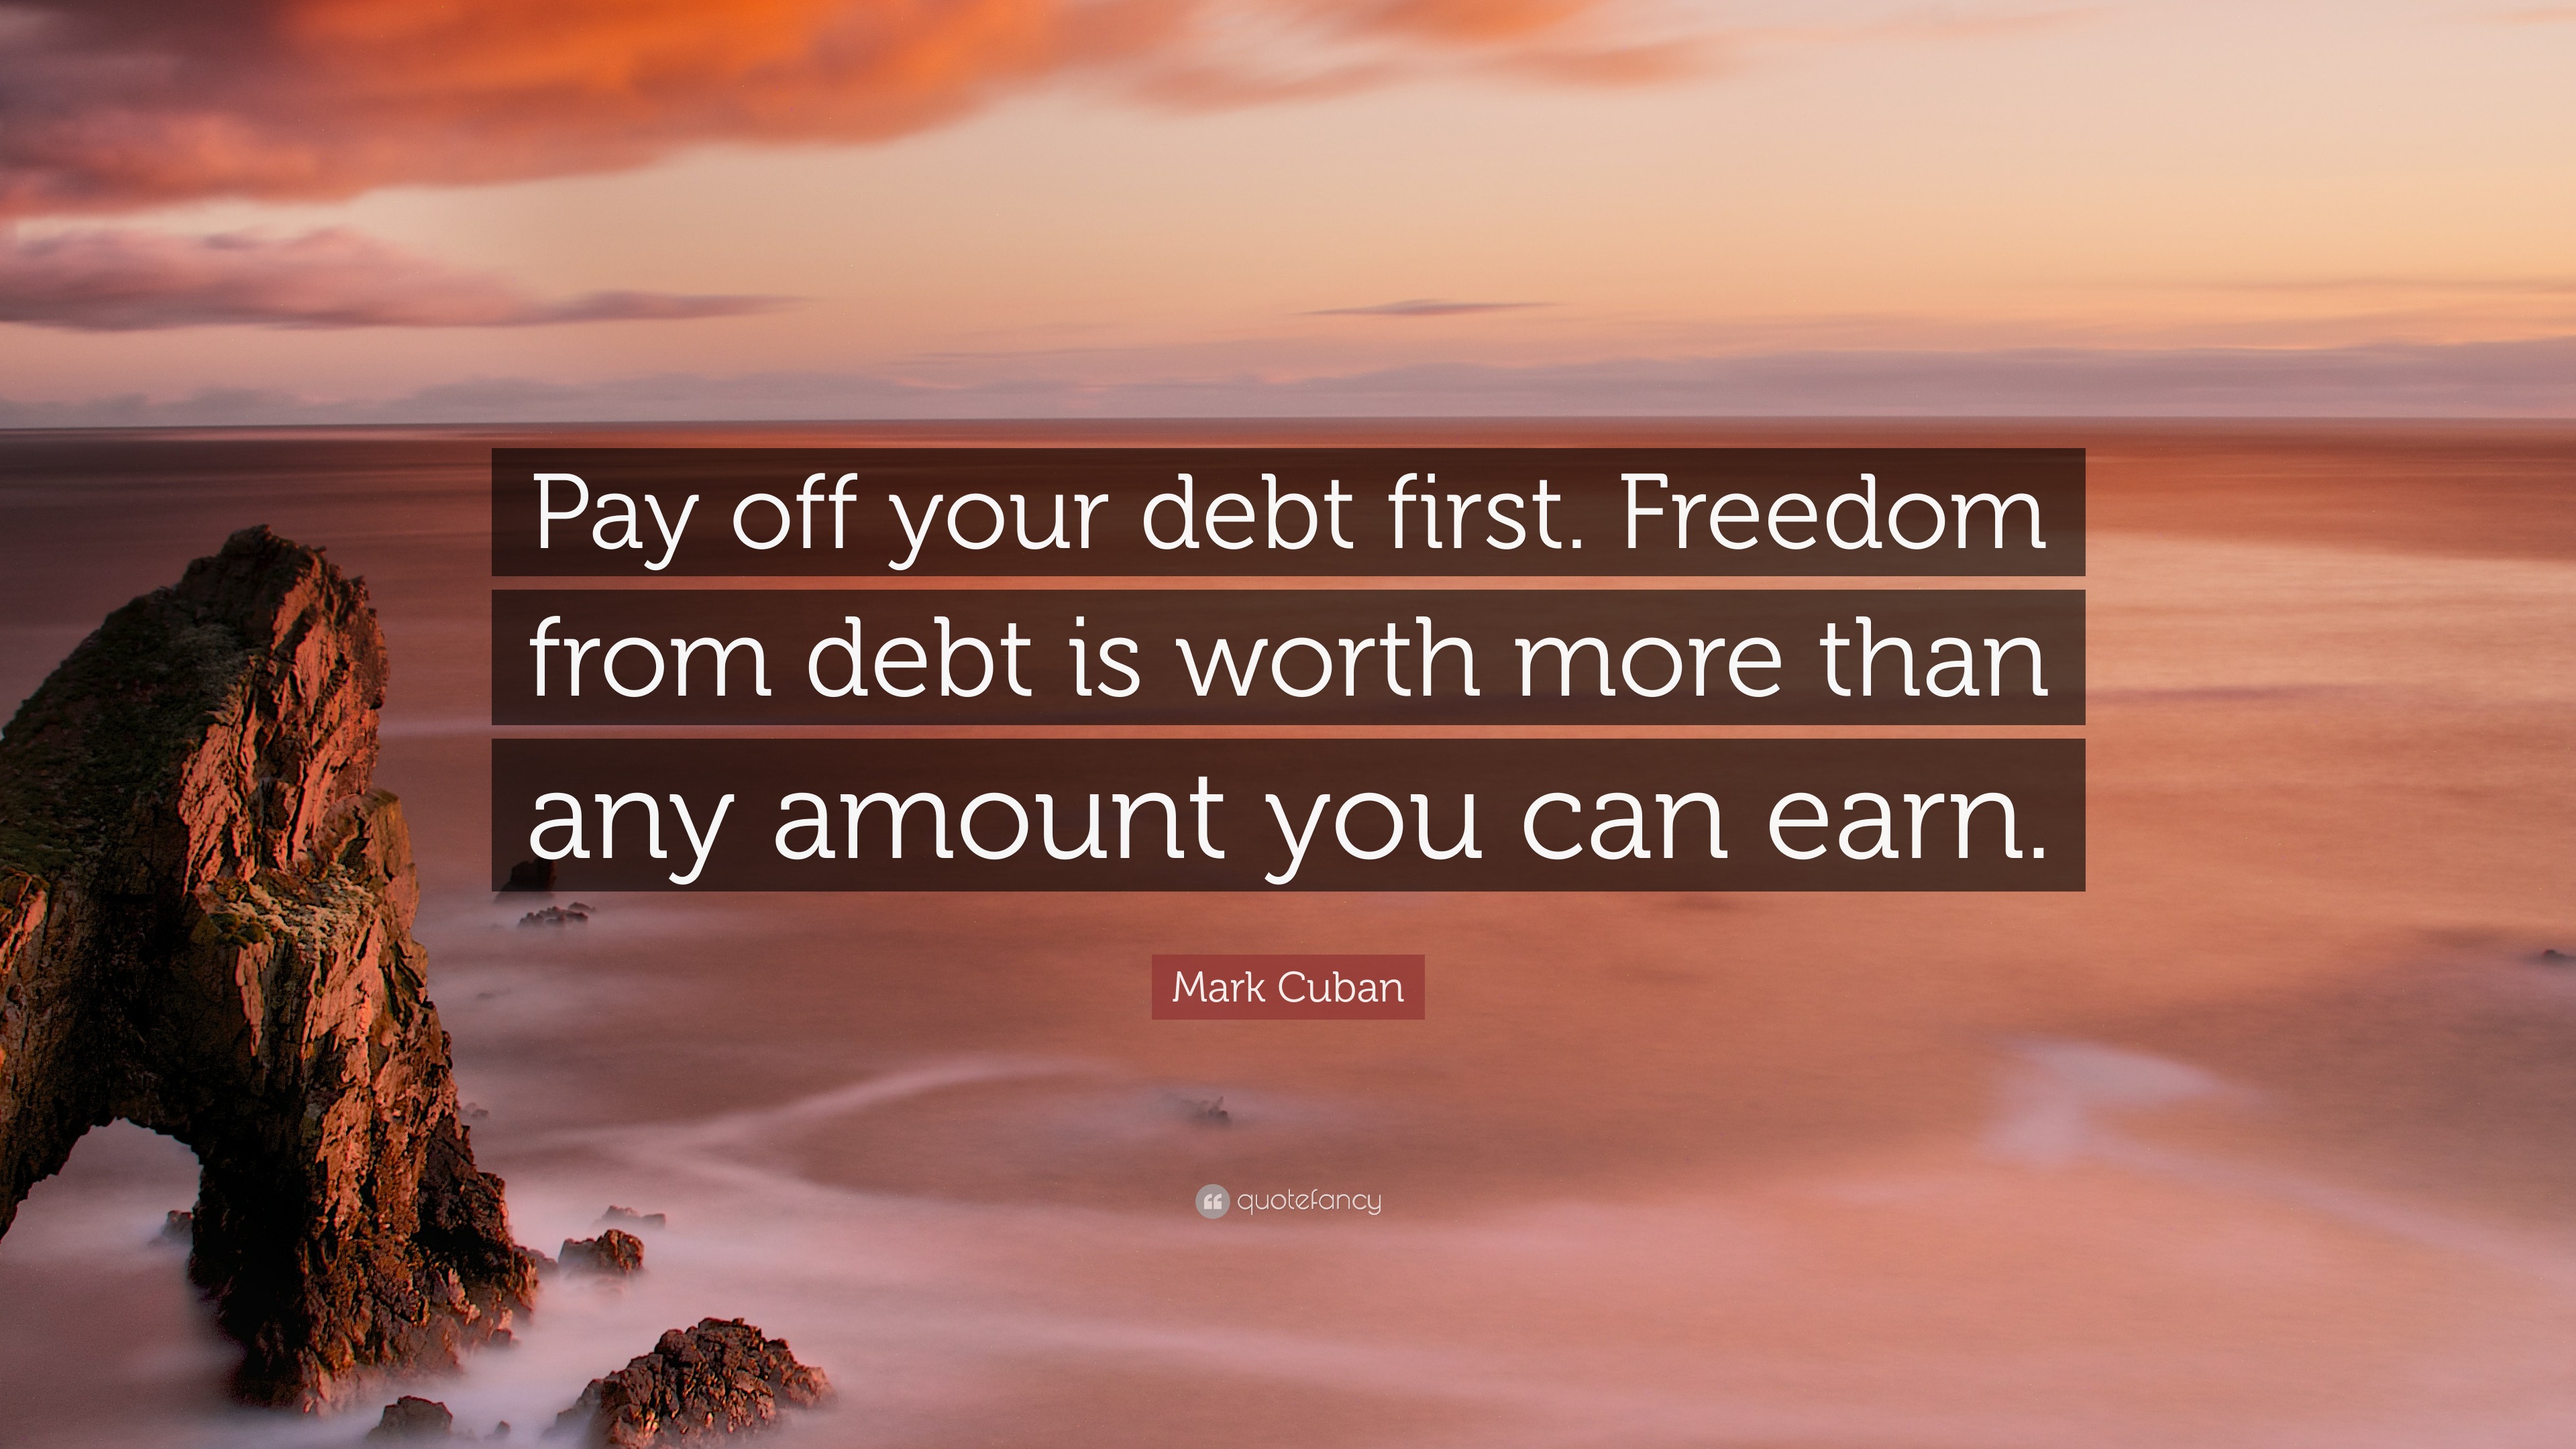 Mark Cuban Quote: “Pay Off Your Debt First. Freedom From Debt Is Worth More Than Any